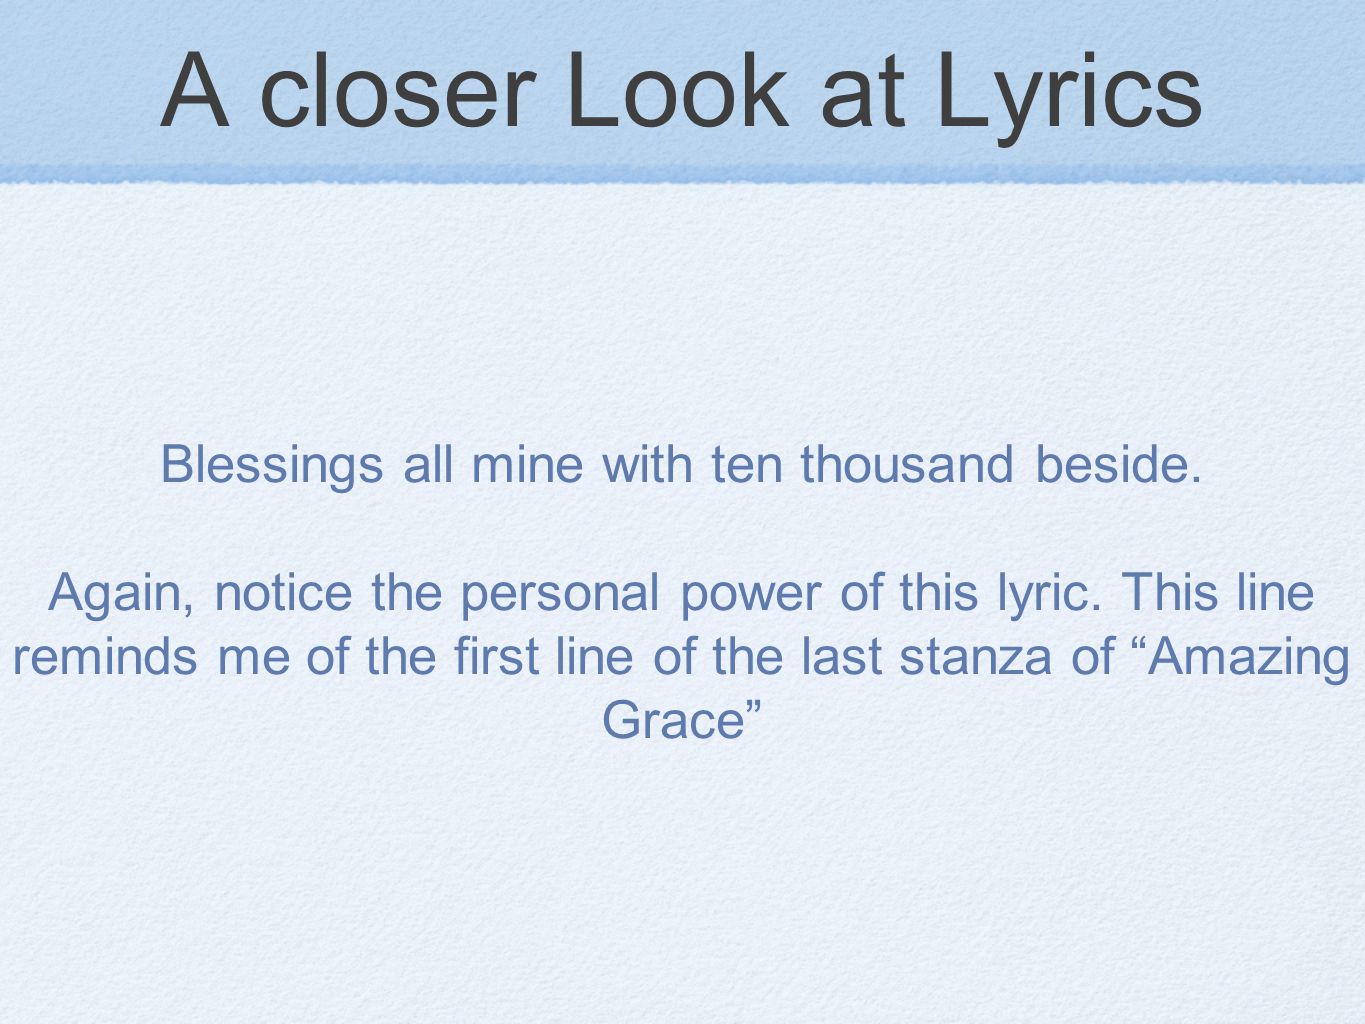 A closer Look at Lyrics Blessings all mine with ten thousand beside.